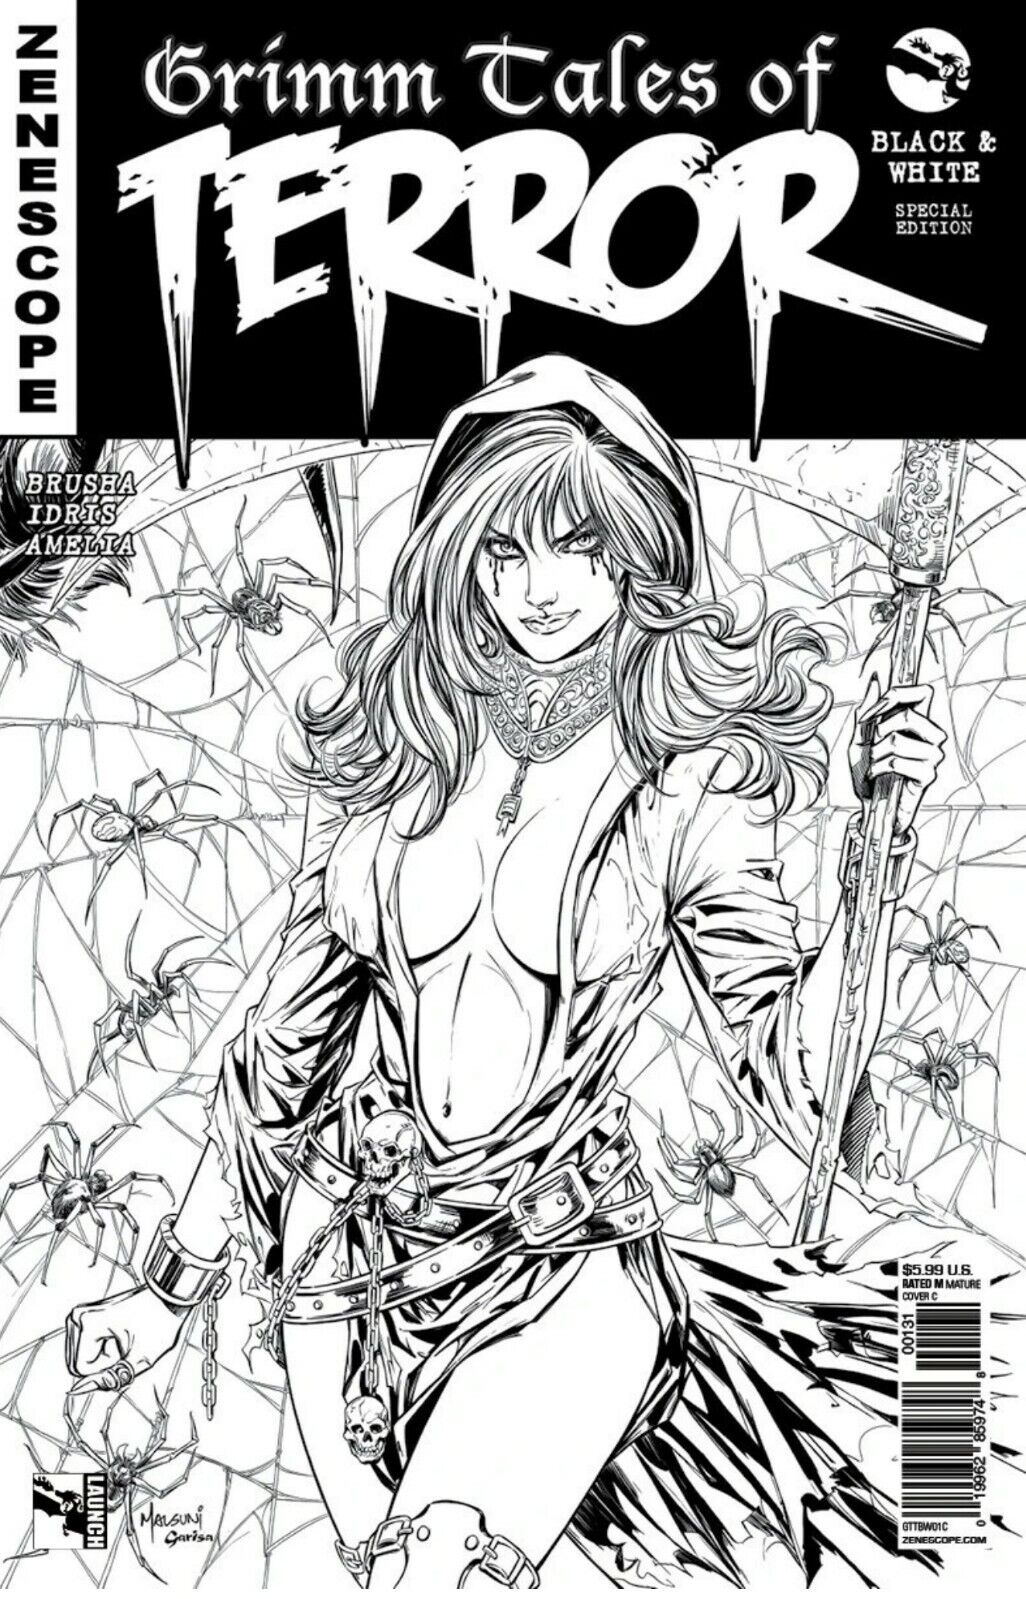 GRIMM TALES OF TERROR BLACK & WHITE SPECIAL EDITION COVER C 2018